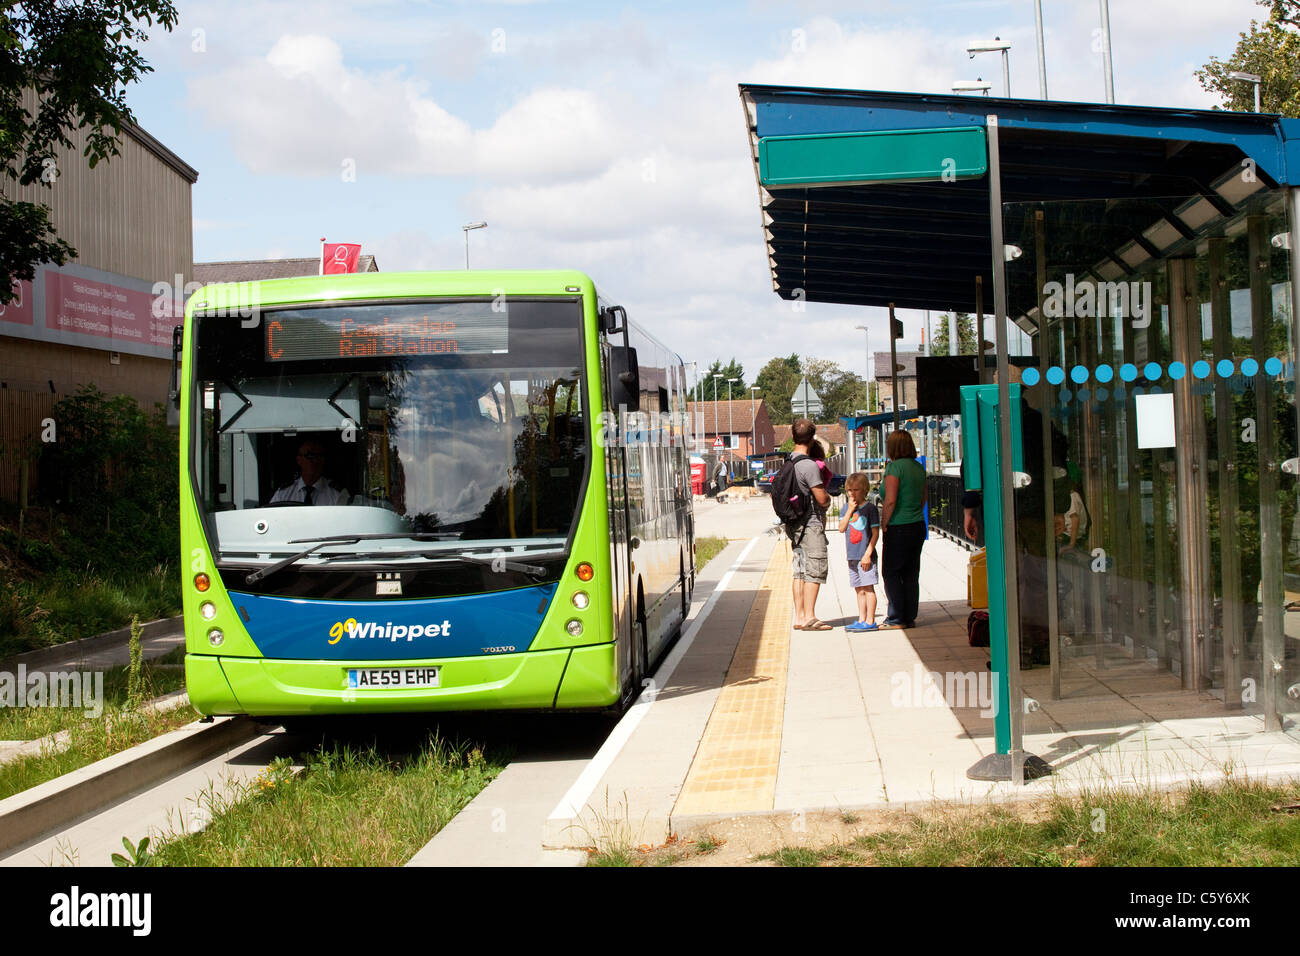 Guided Busway Stock Photos & Guided Busway Stock Images - Alamy